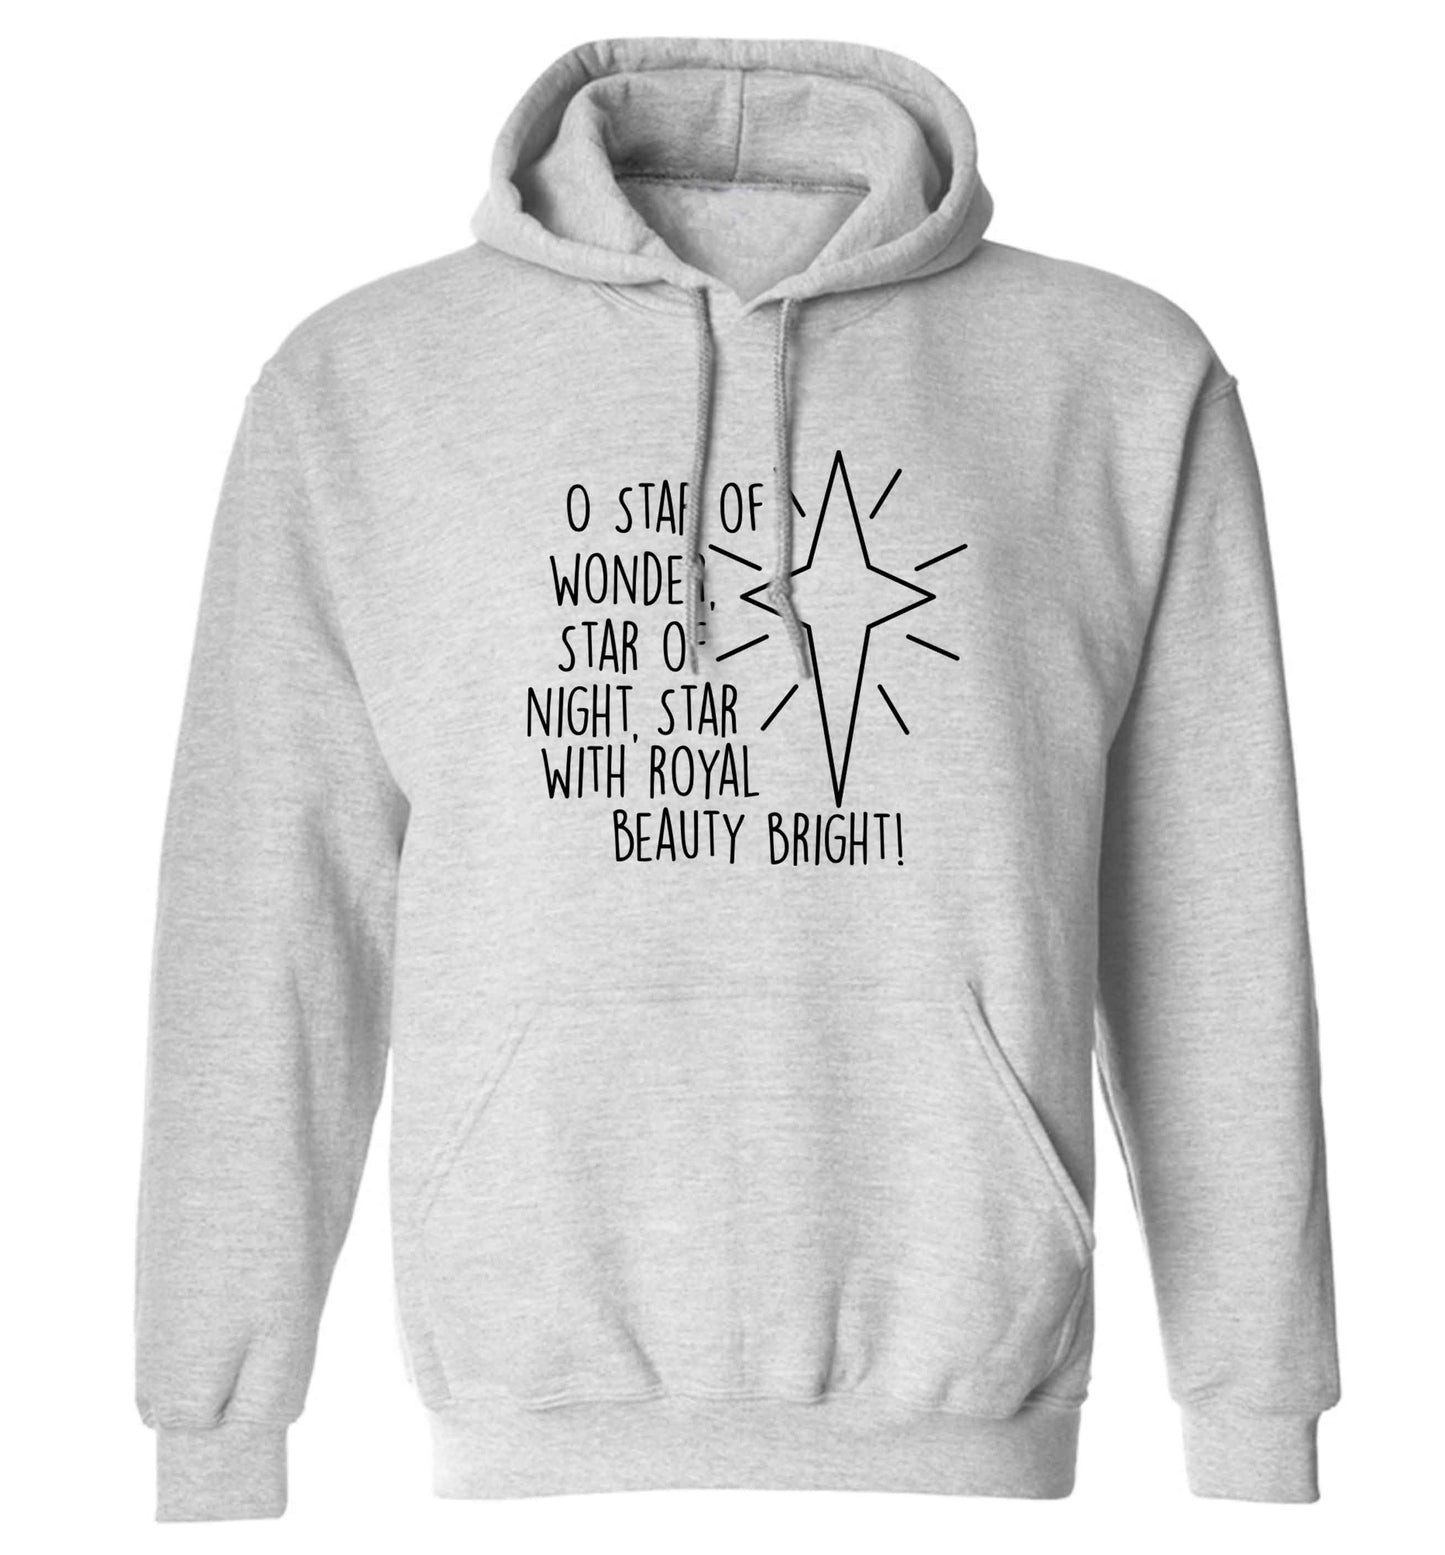 Oh star of wonder star of night, star with royal beauty bright adults unisex grey hoodie 2XL